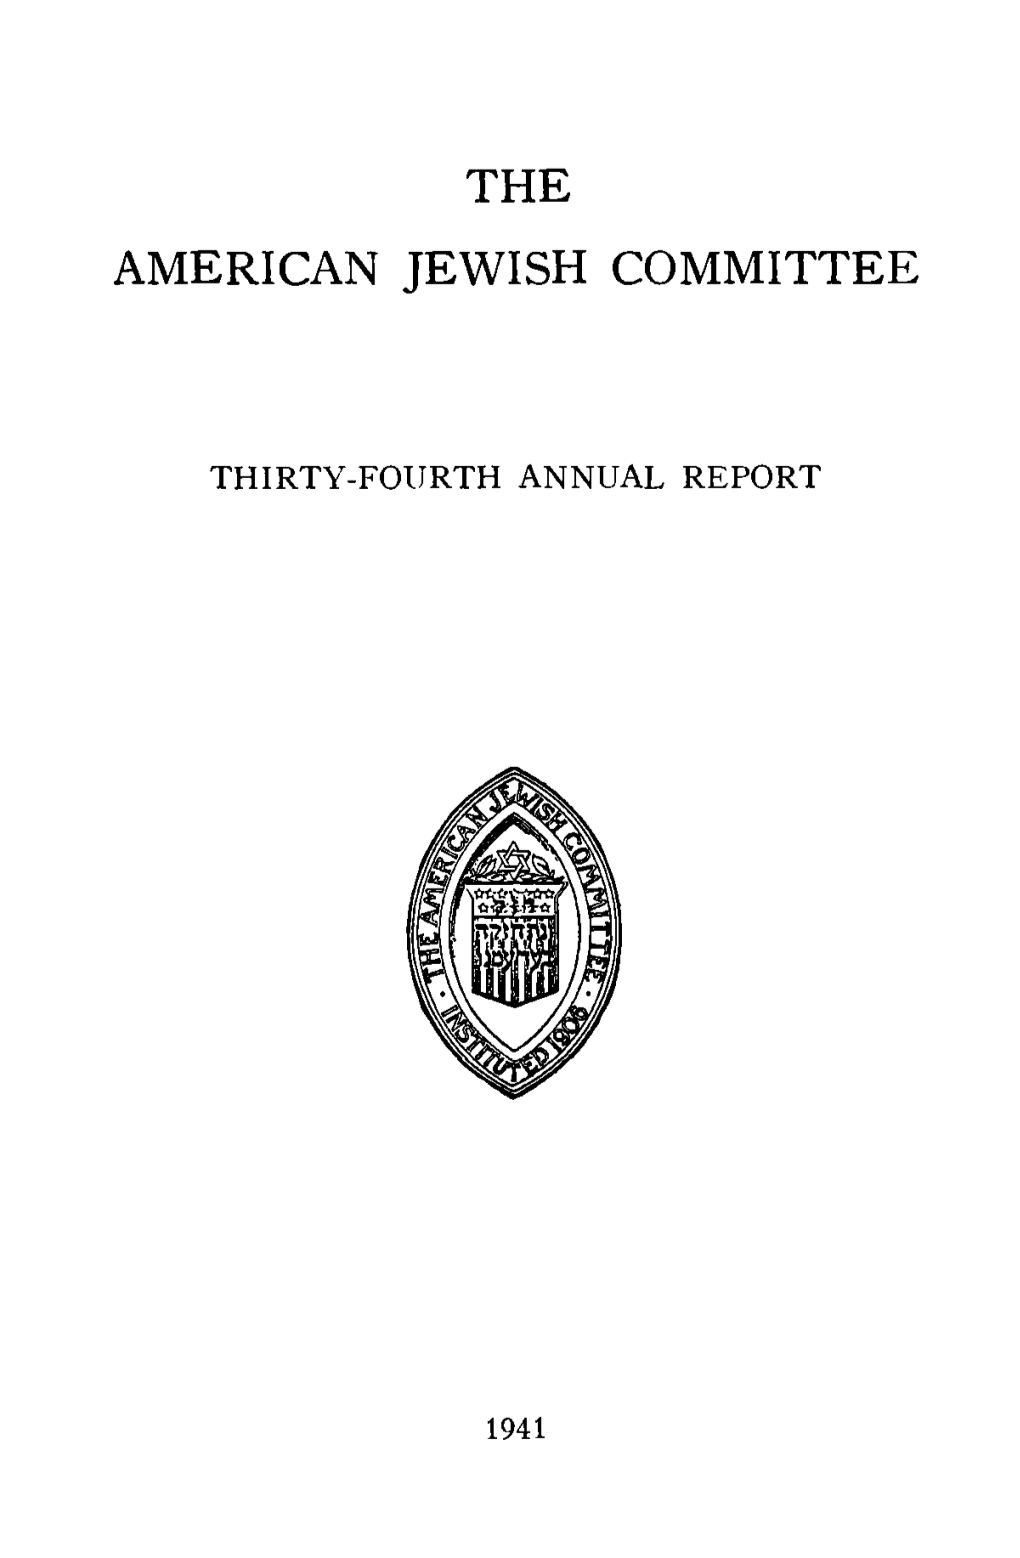 The American Jewish Committee